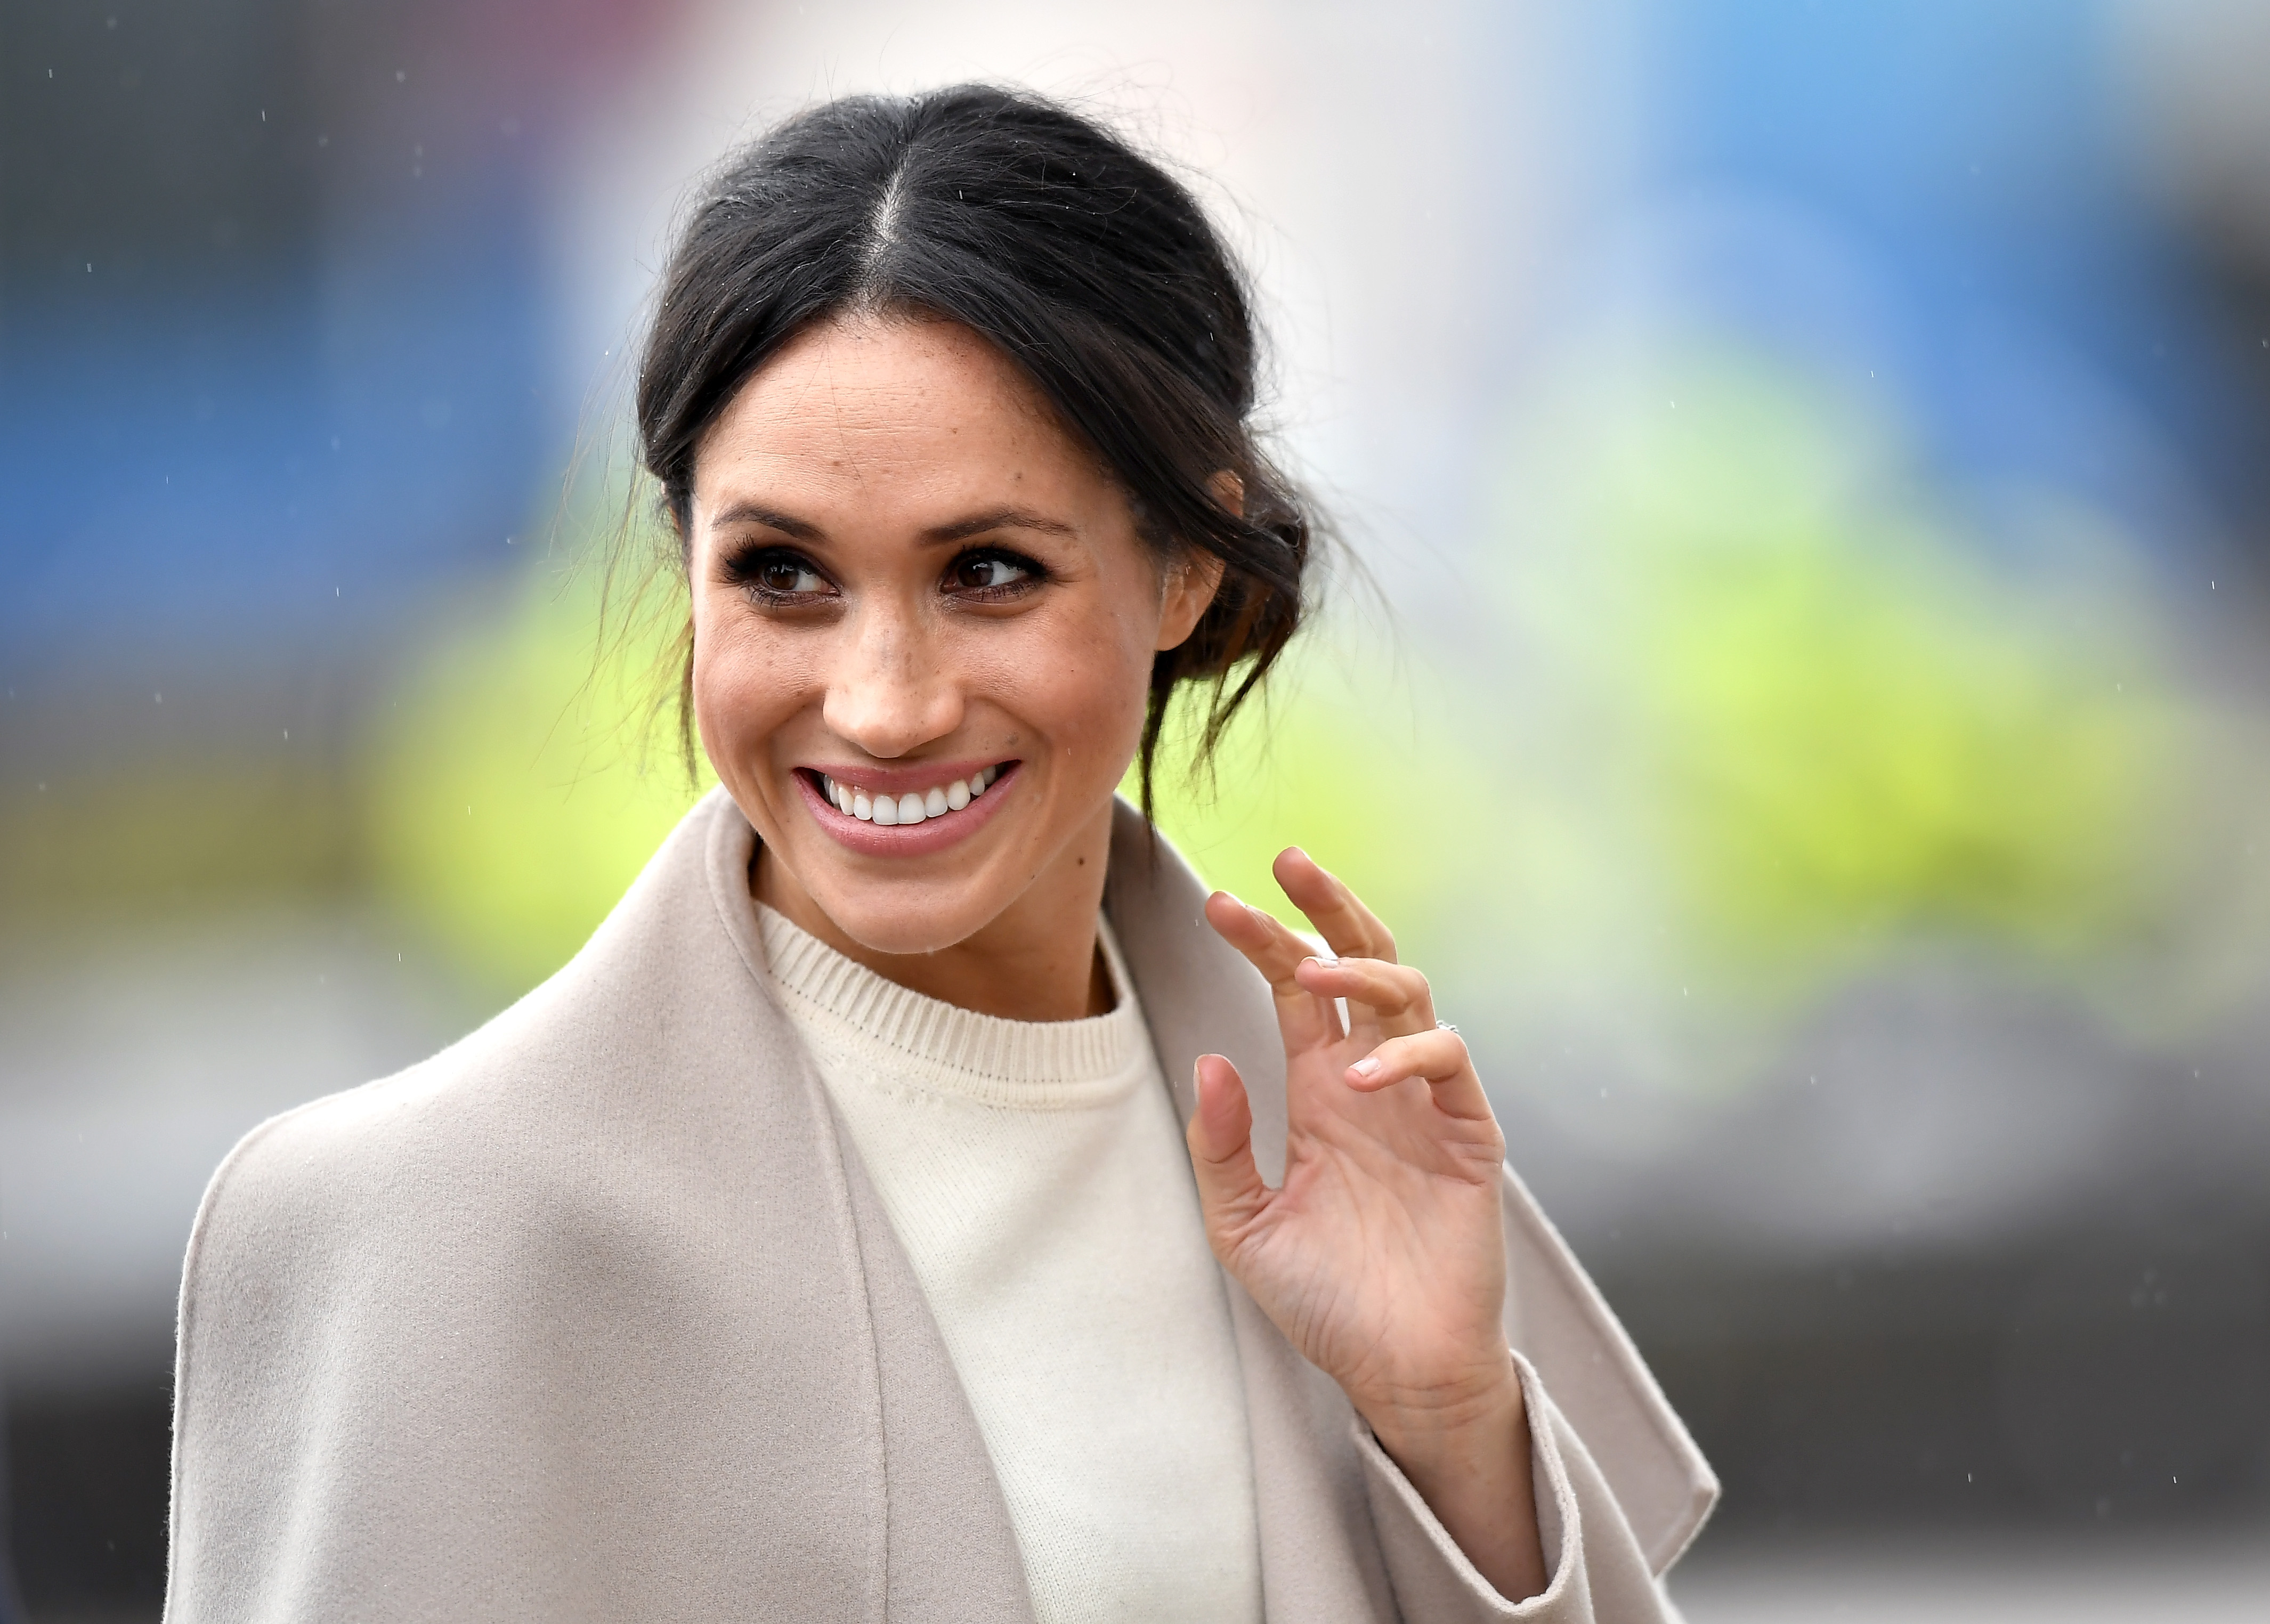 Meghan Markle in Belfast, Northern Ireland in 2018 | Source: Getty Images